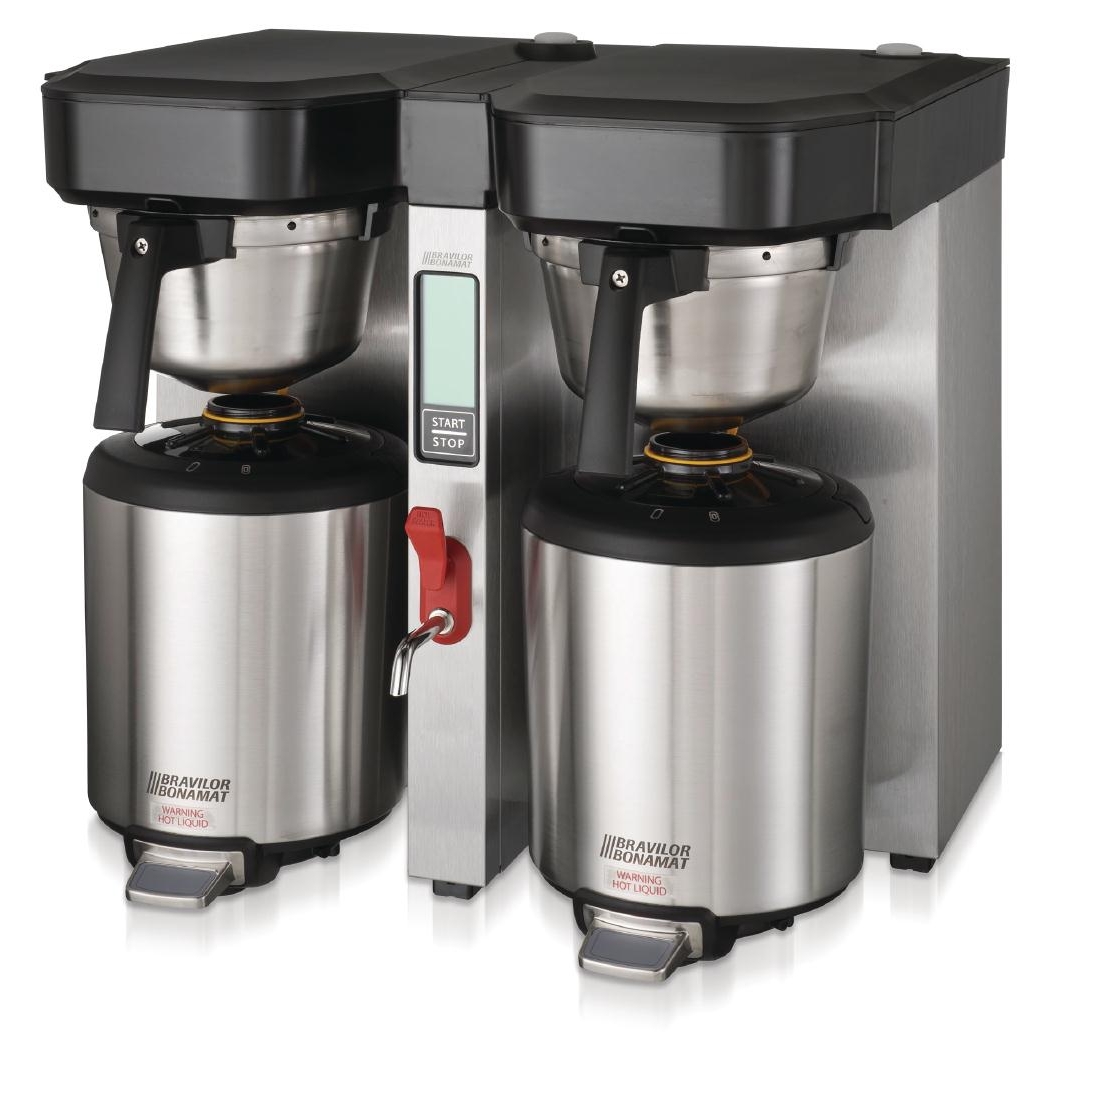 Bravilor Aurora 2 x 5.7L Twin Low Profile Thermal Brewer 3 Phase